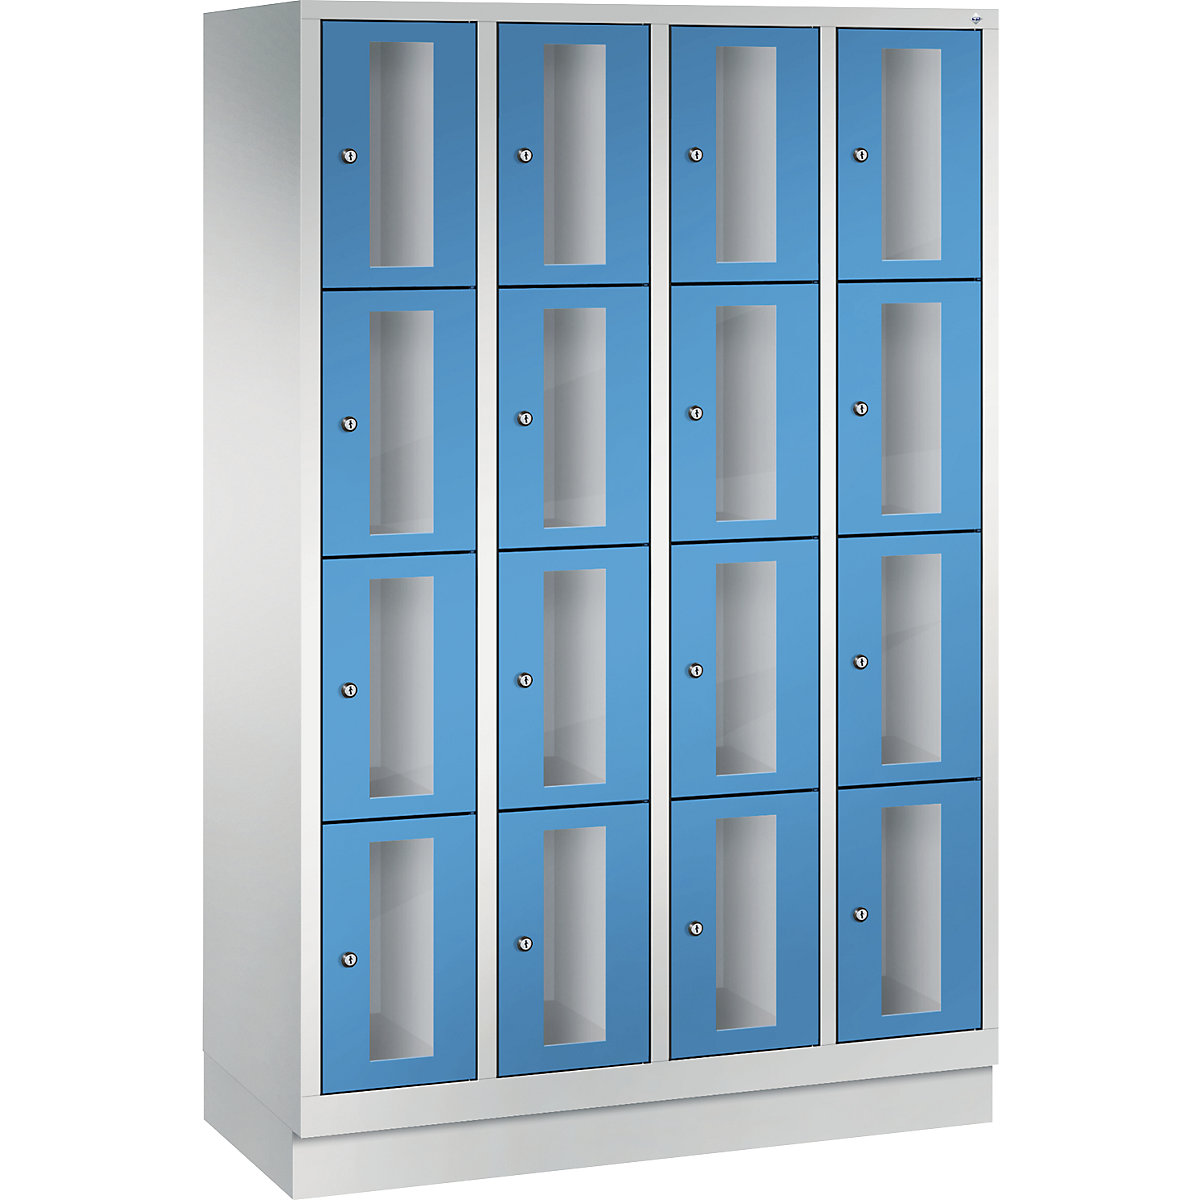 C+P – CLASSIC locker unit, compartment height 375 mm, with plinth, 16 compartments, width 1190 mm, light blue door